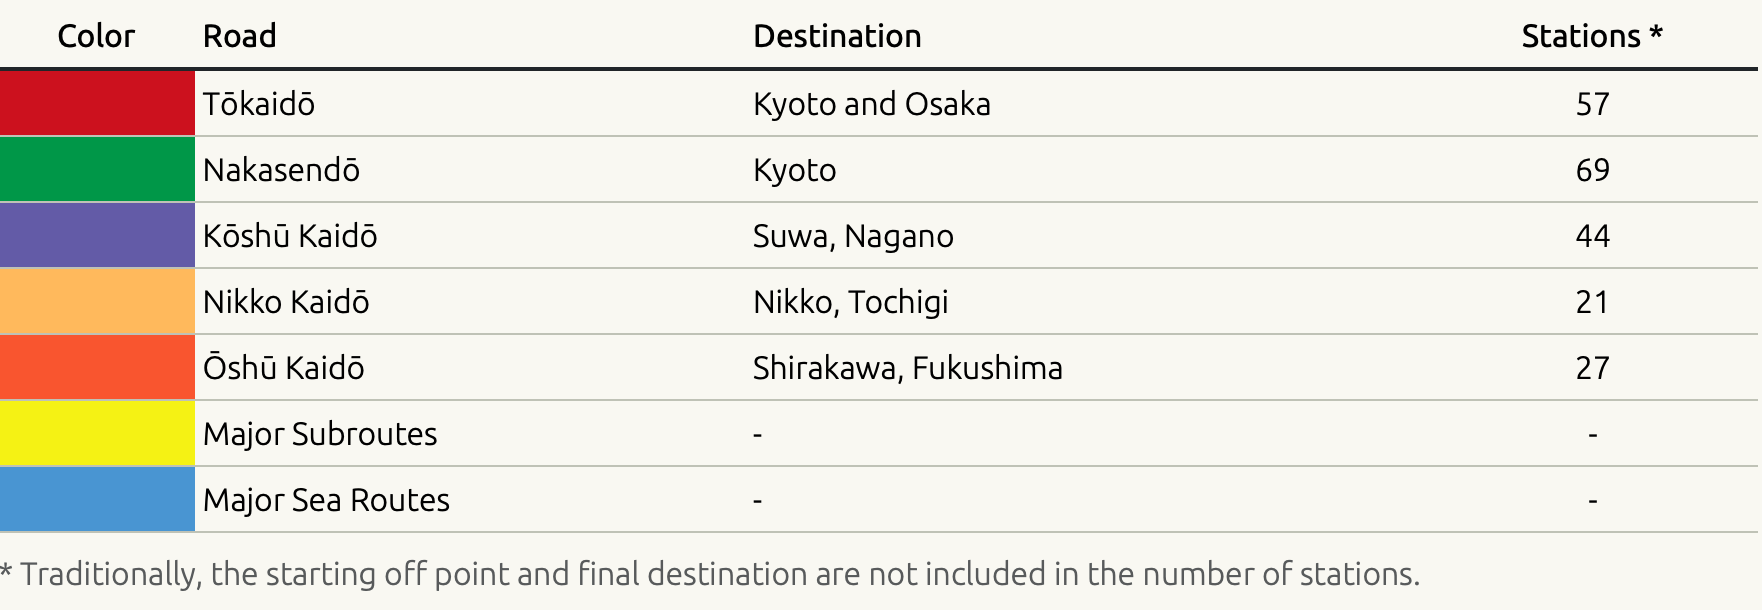 major transport connections in Edo and early Meiji period Japan